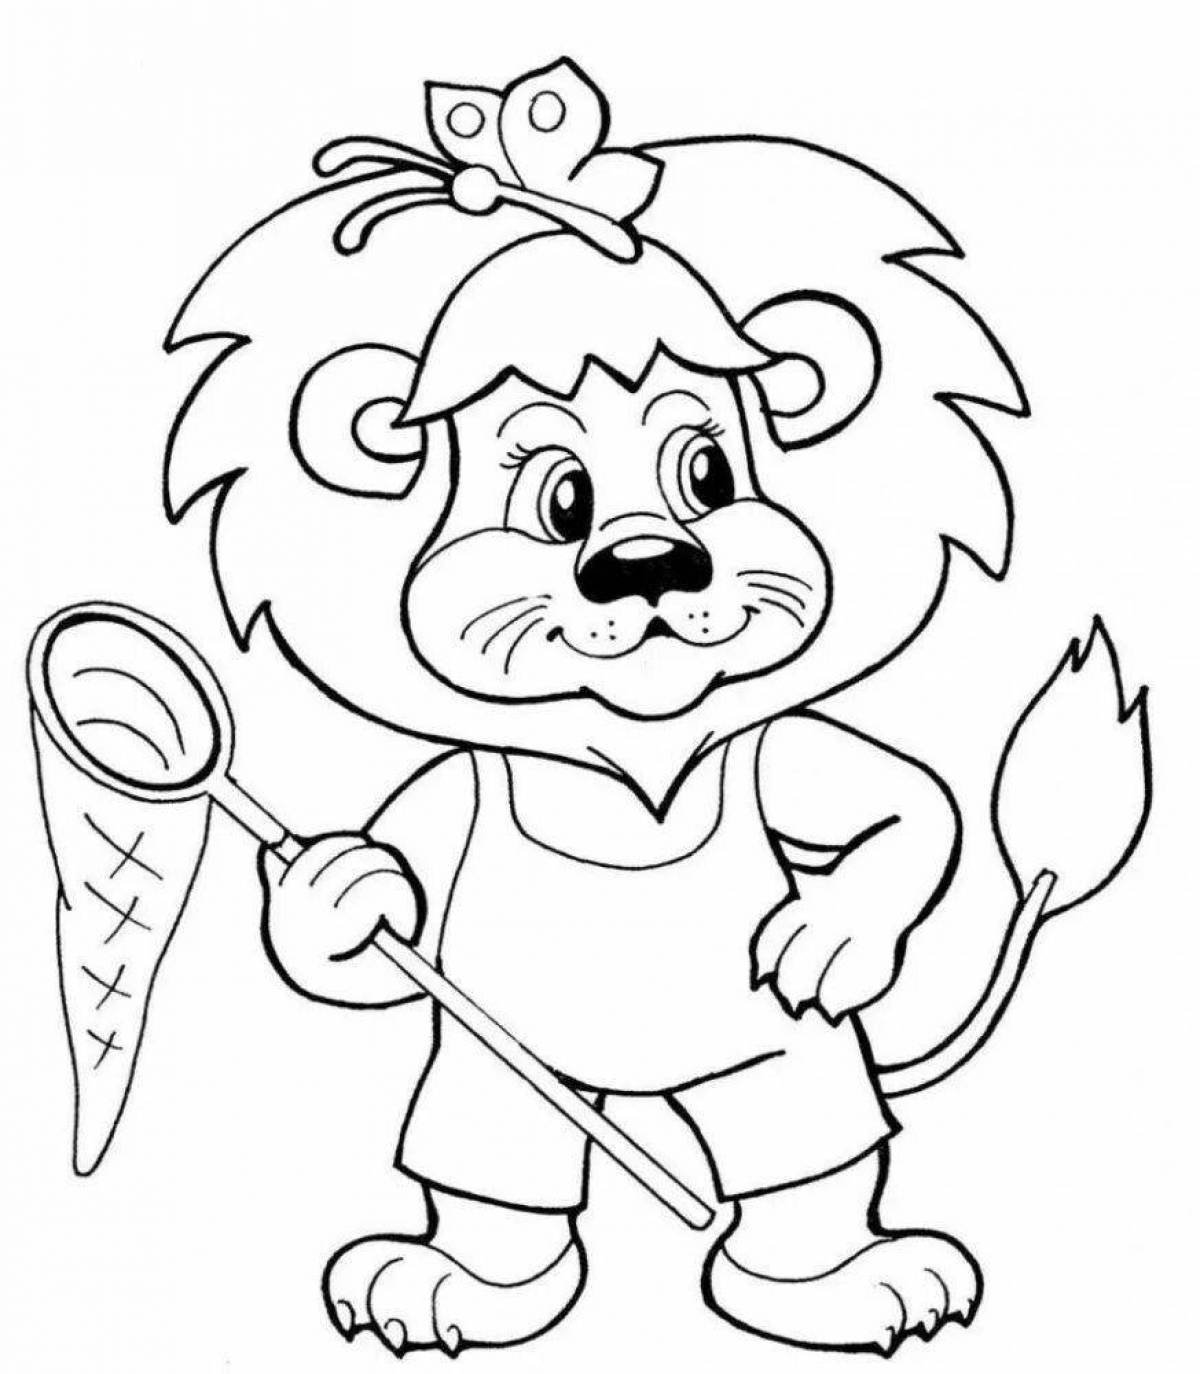 Exciting lion cub coloring book for kids